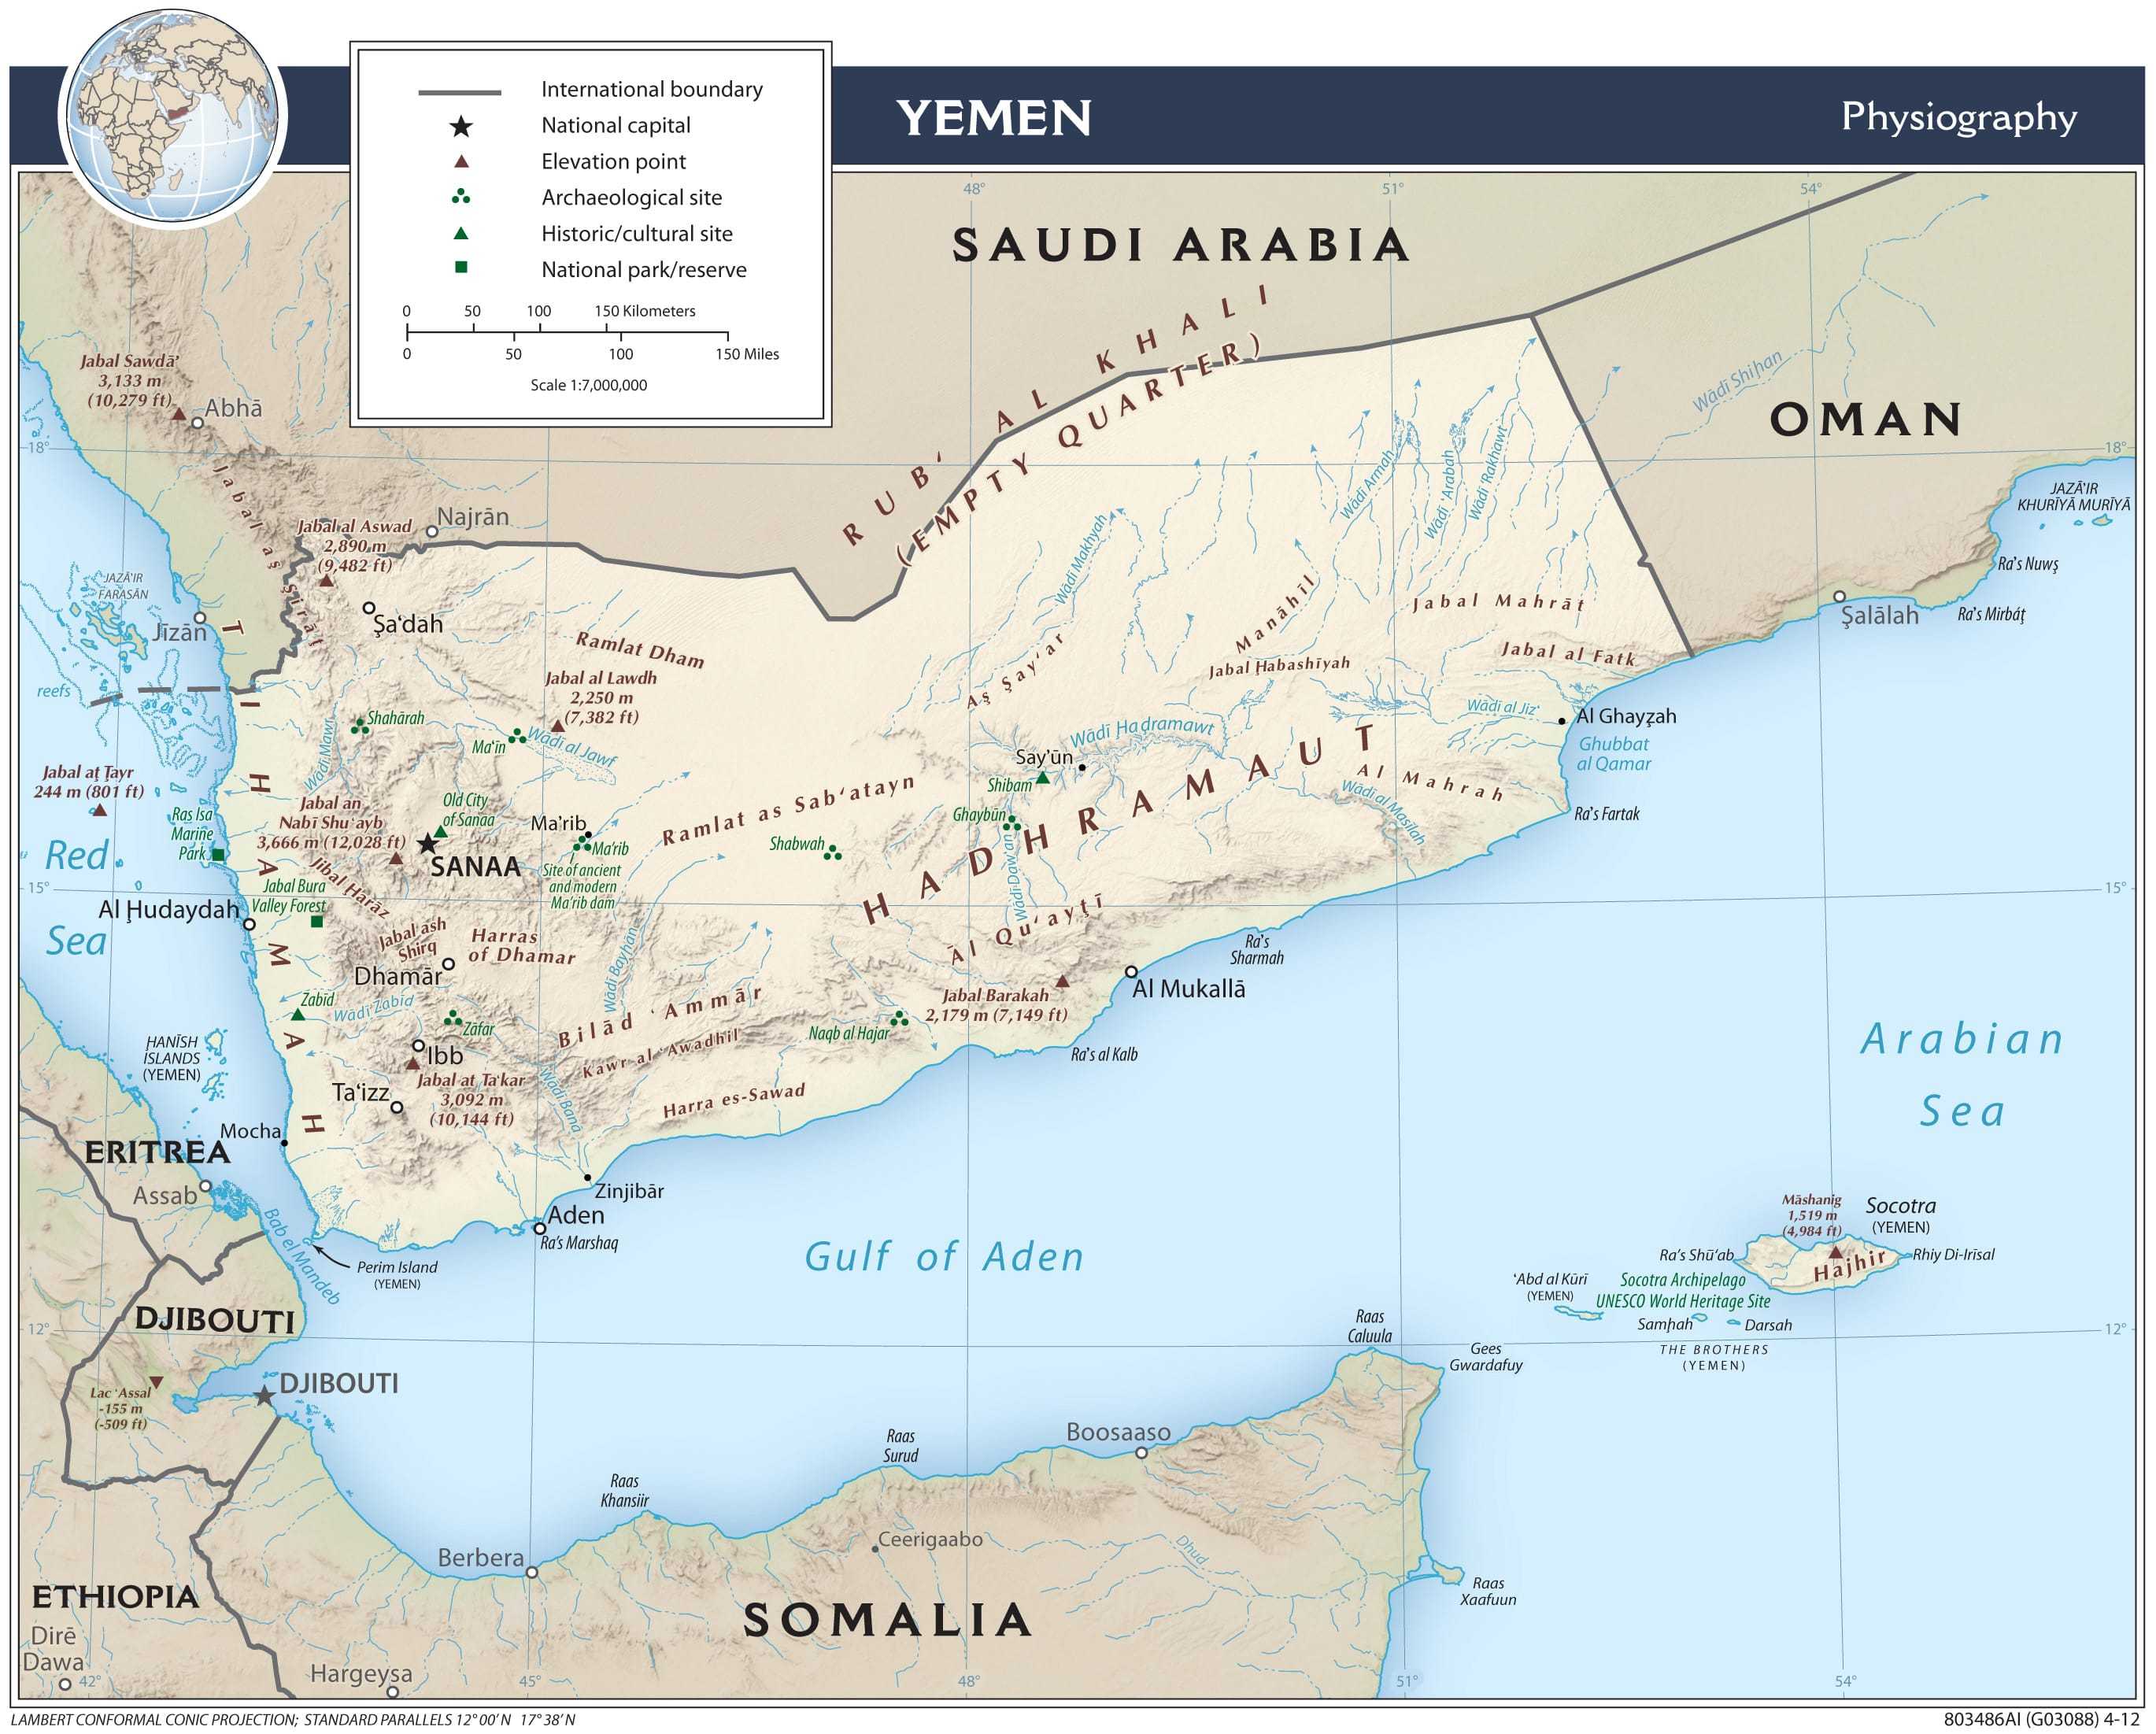 Physiographical map of Yemen.